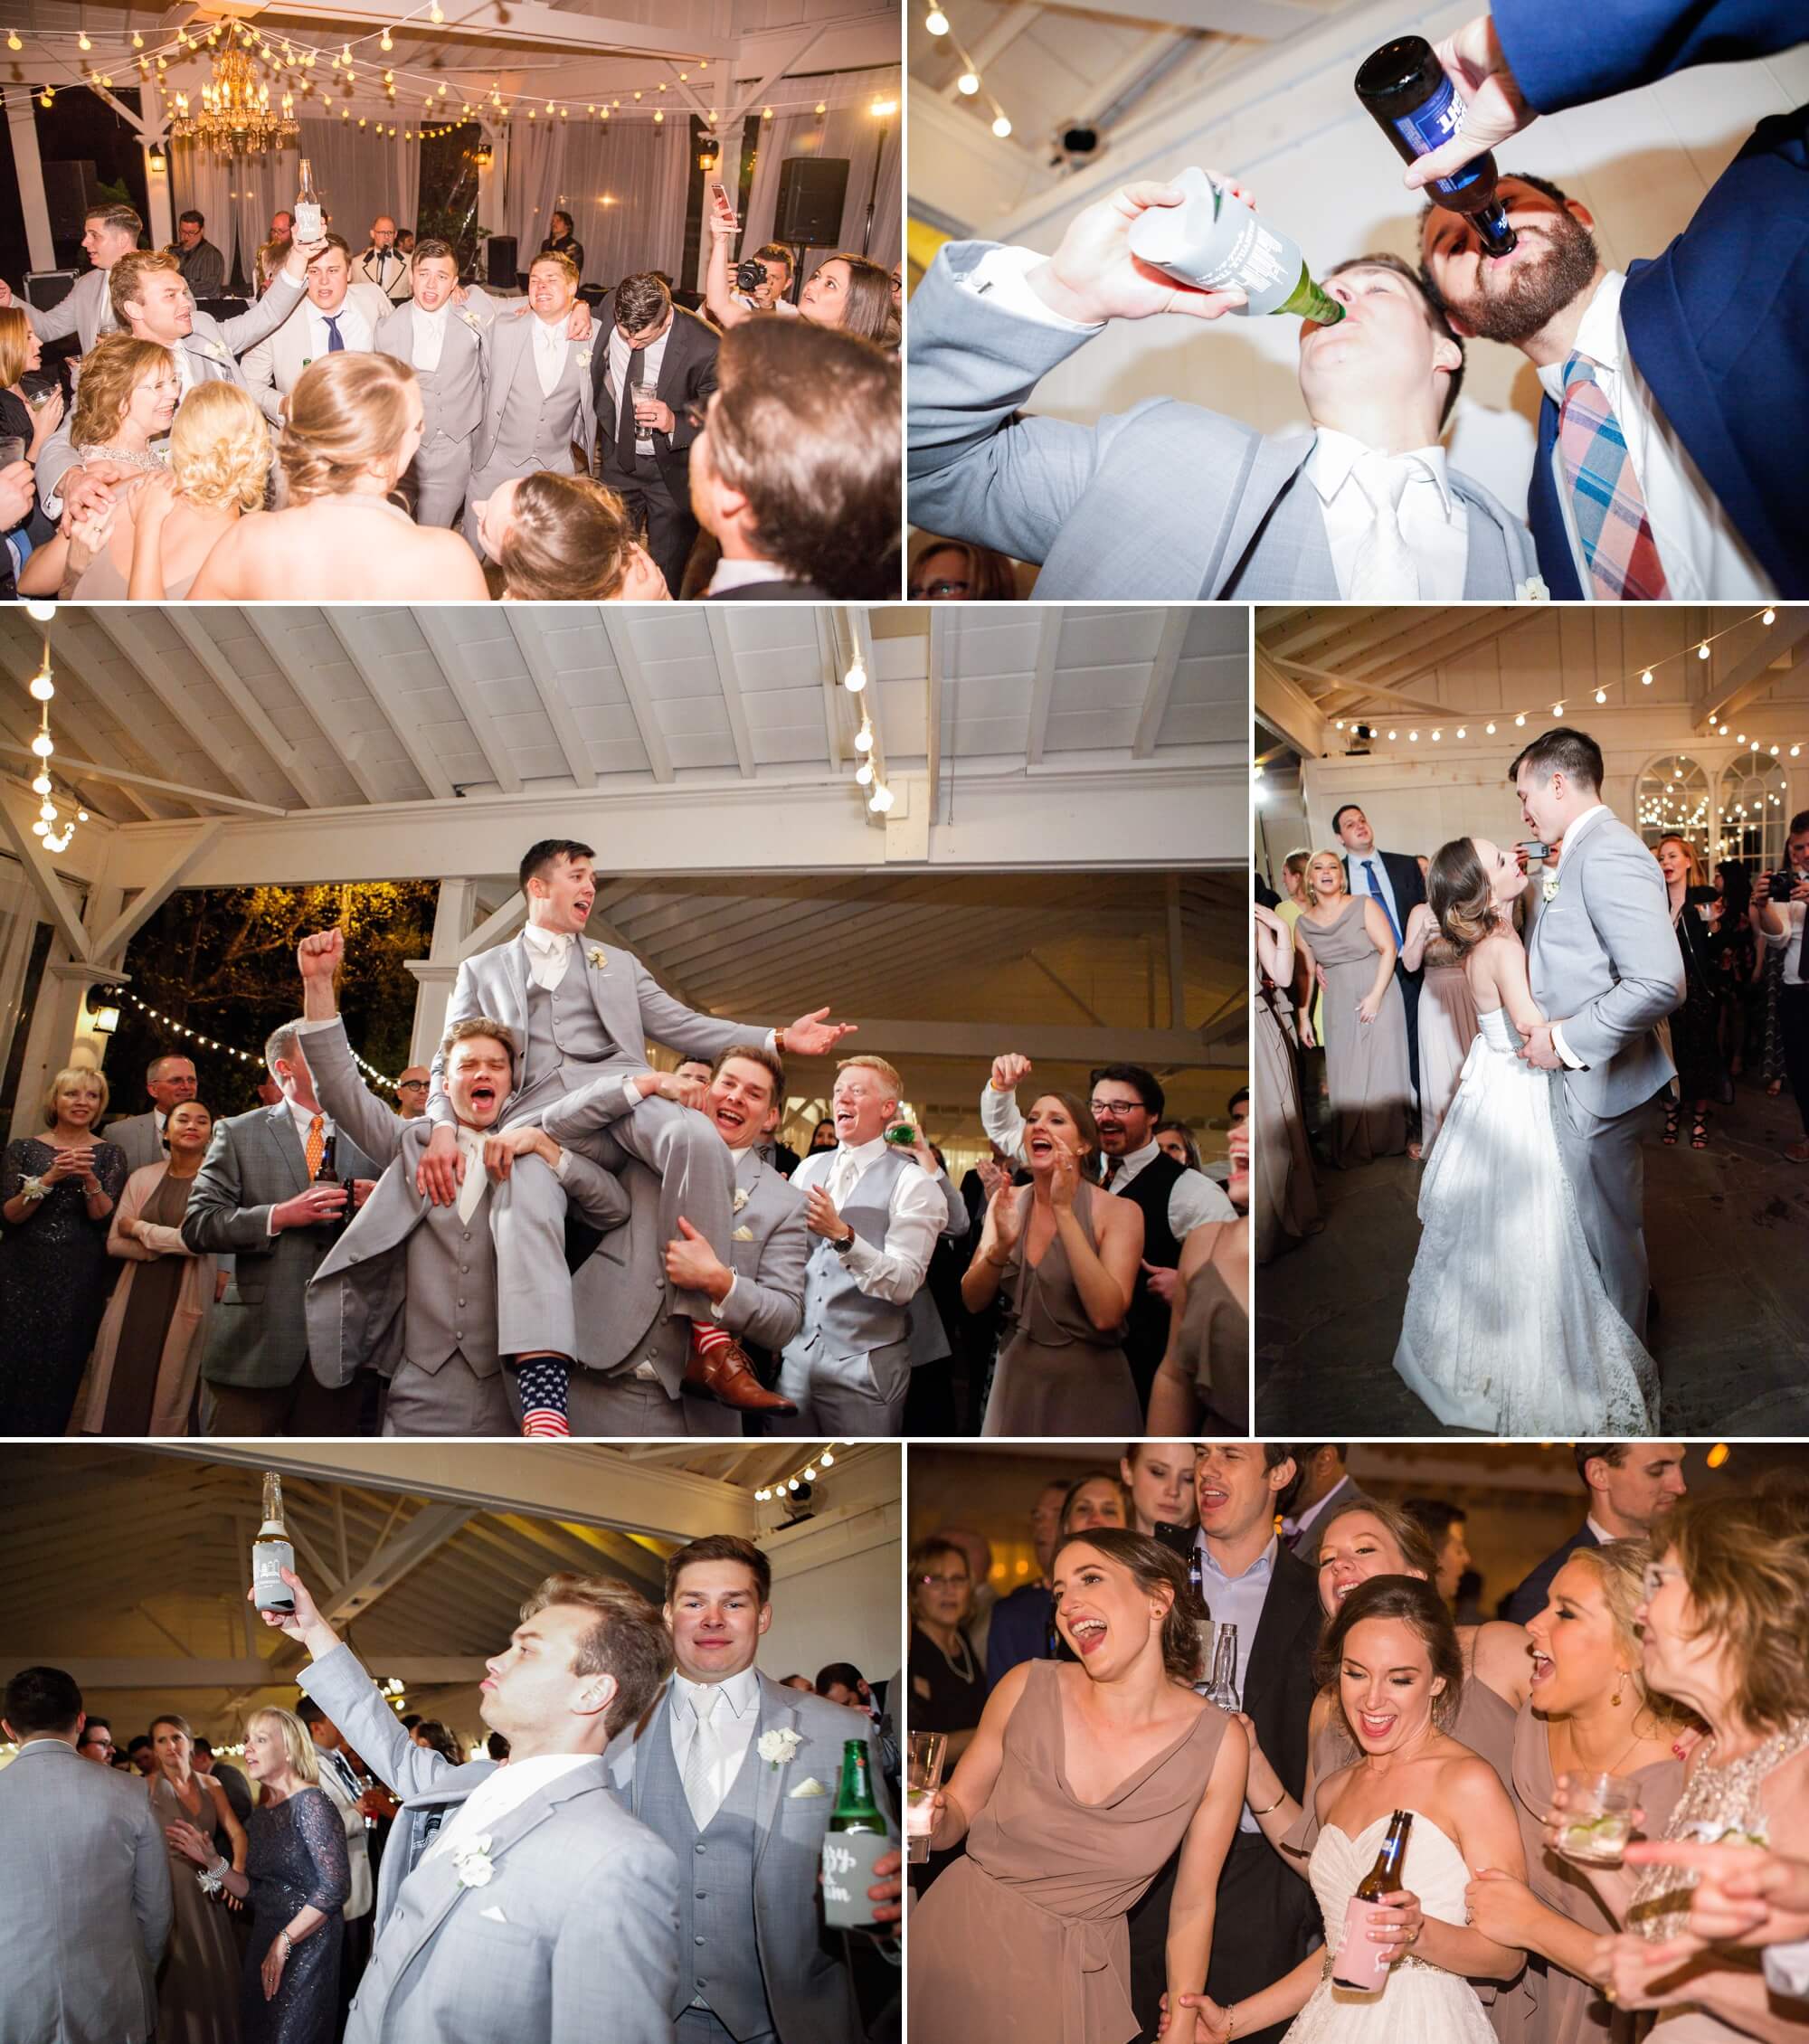 Dancing, drinking and fun times at night time wedding reception. Spring wedding at Cedarwood Weddings in Nashville, TN. Photo by Krista Lee Photography, from Sam and Izzy's wedding day.